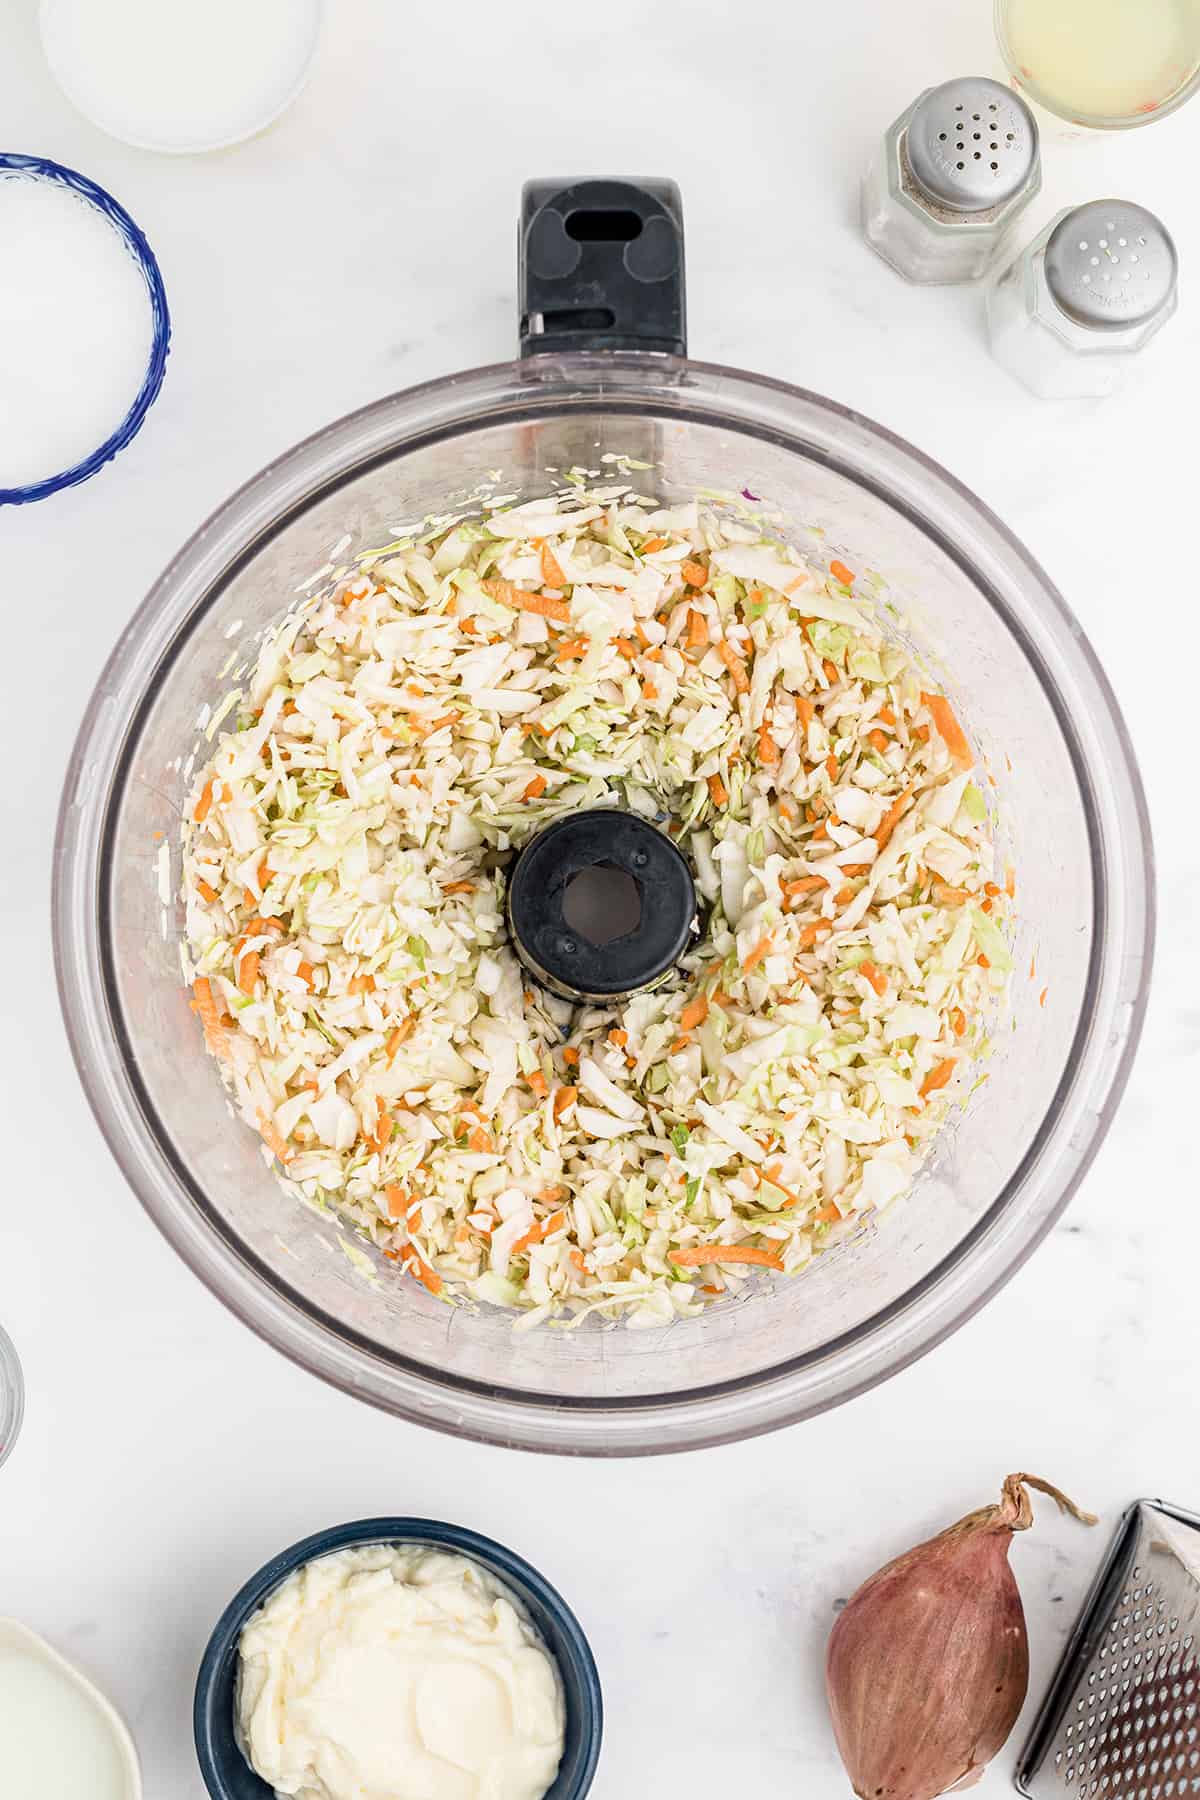 Coleslaw cabbage mix in a food processor bowl.